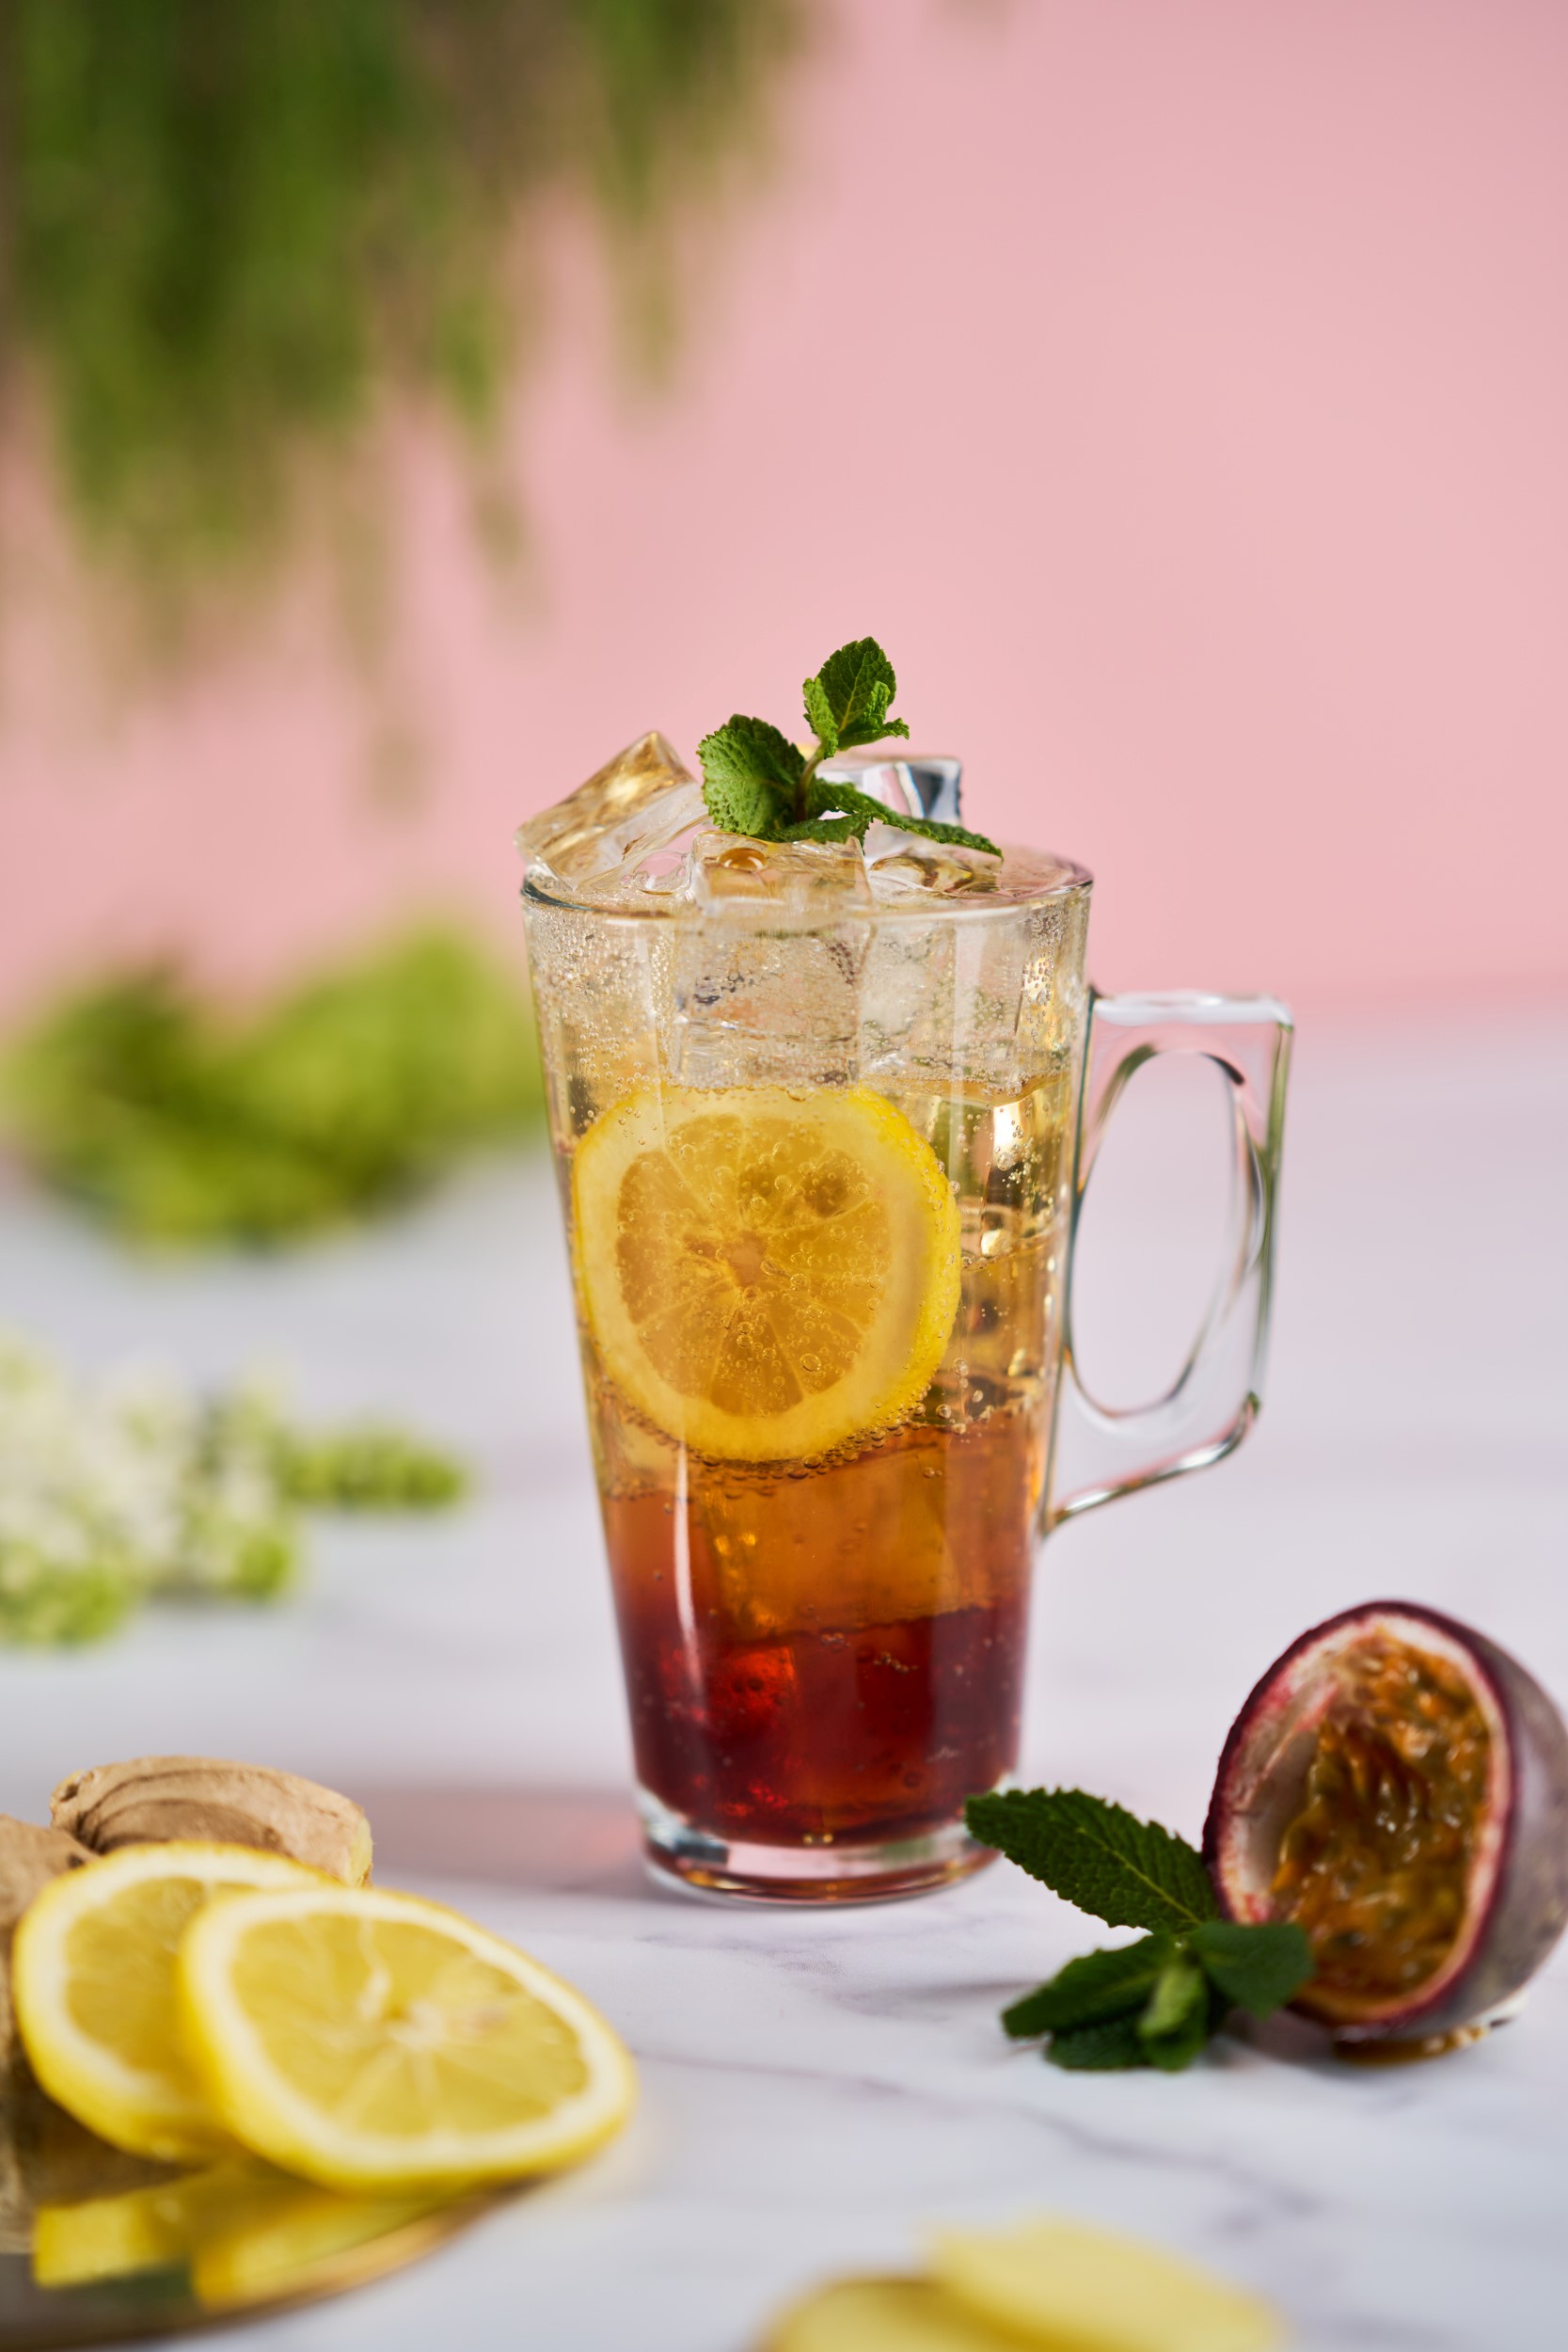 Passionfruit, Lemon, and Ginger Iced Tea